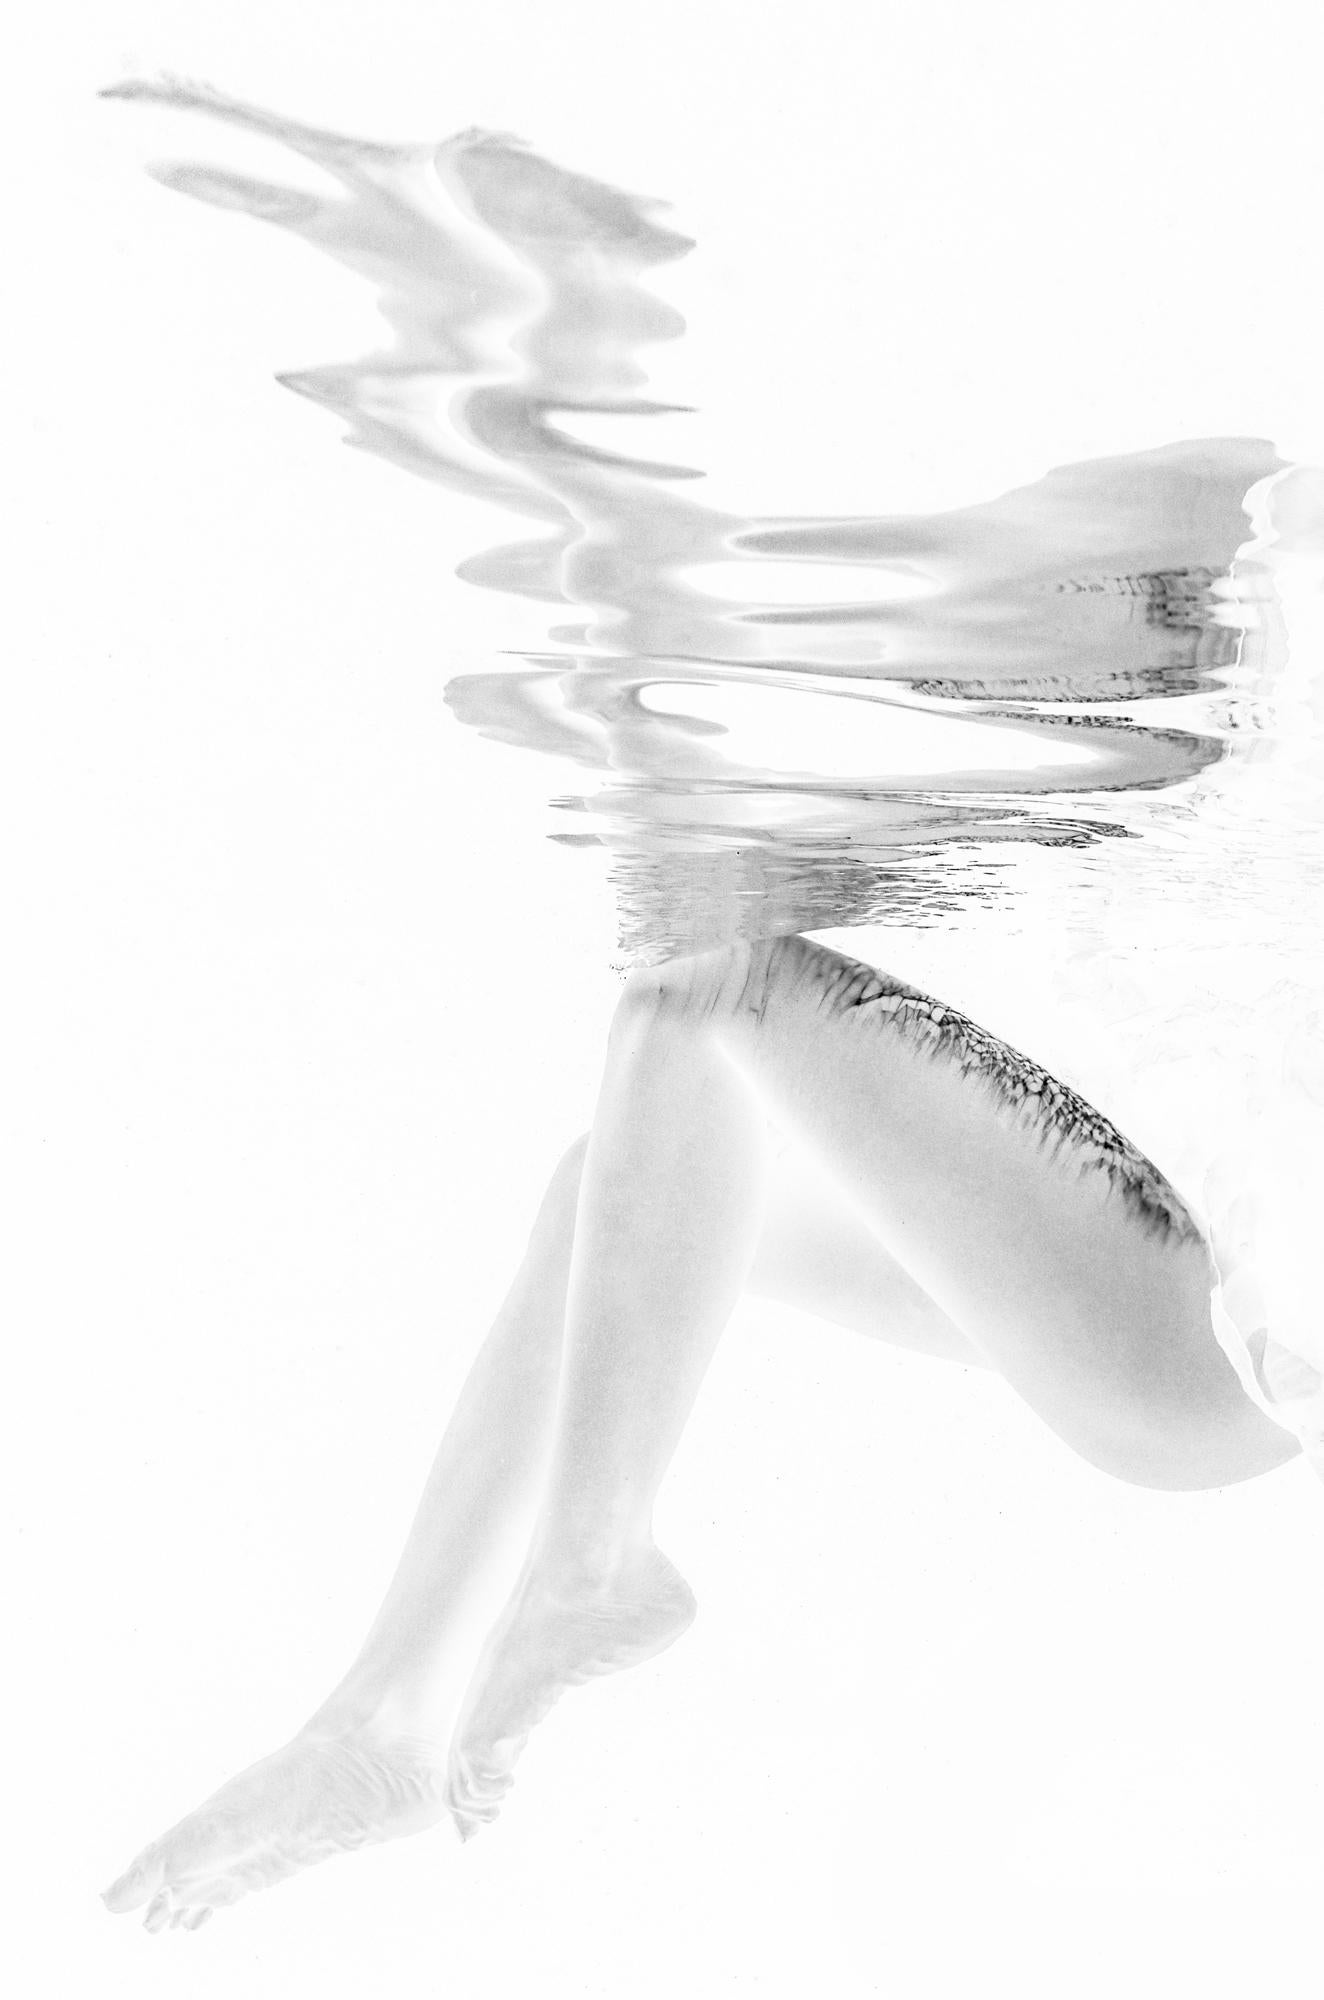 Alex Sher Black and White Photograph - Sketch - underwater b&w photograph - archival pigment print 24x16"